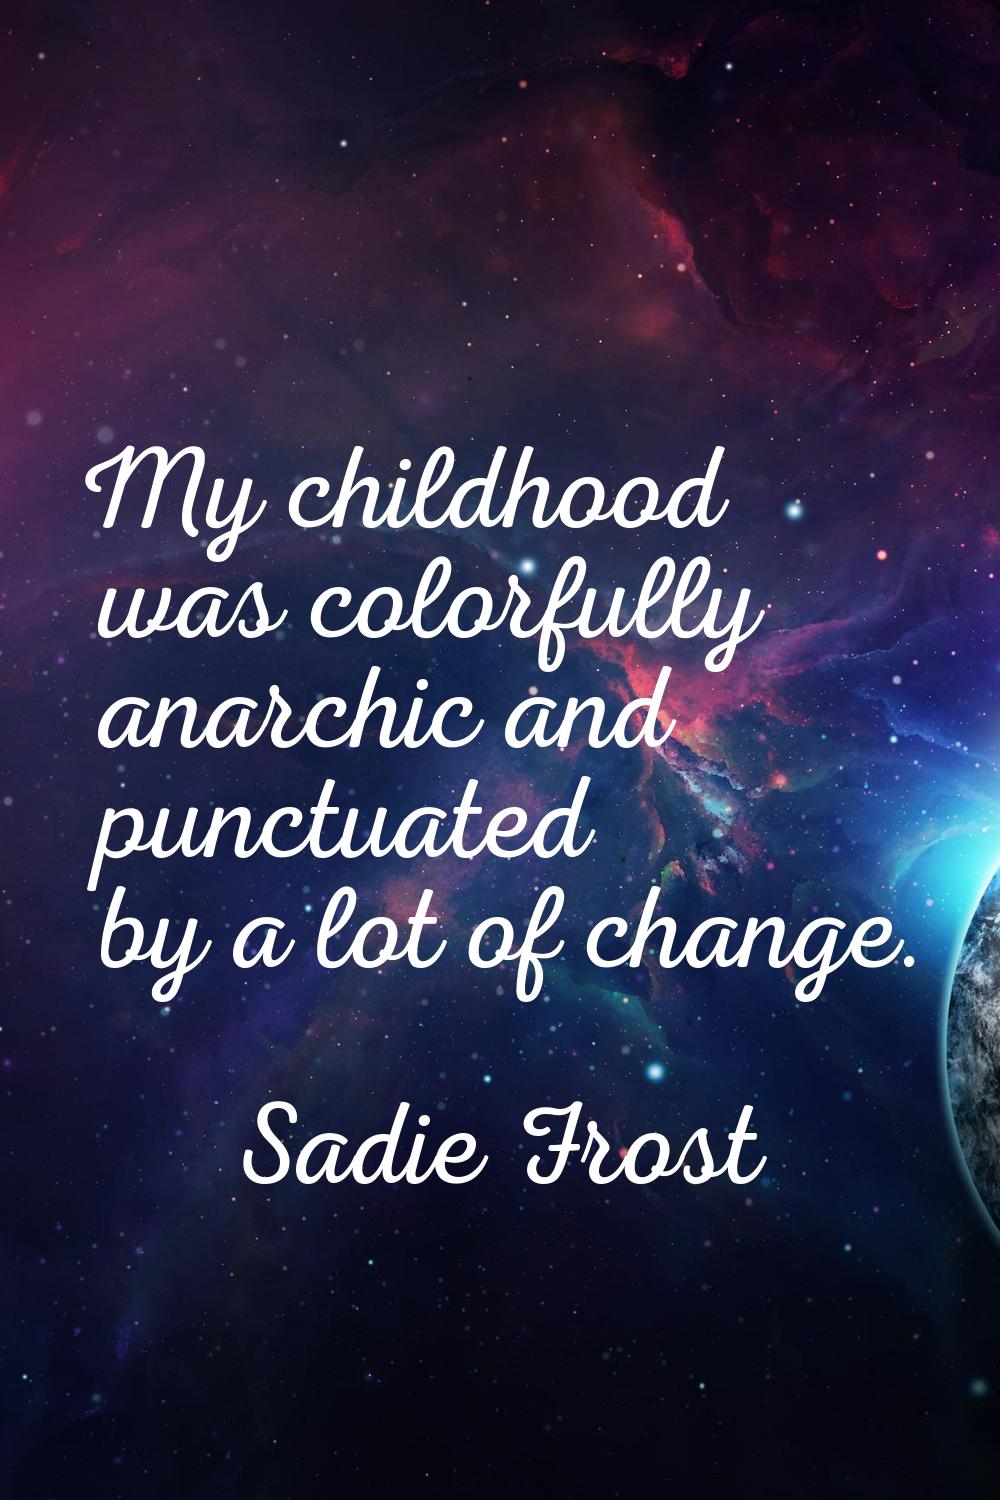 My childhood was colorfully anarchic and punctuated by a lot of change.